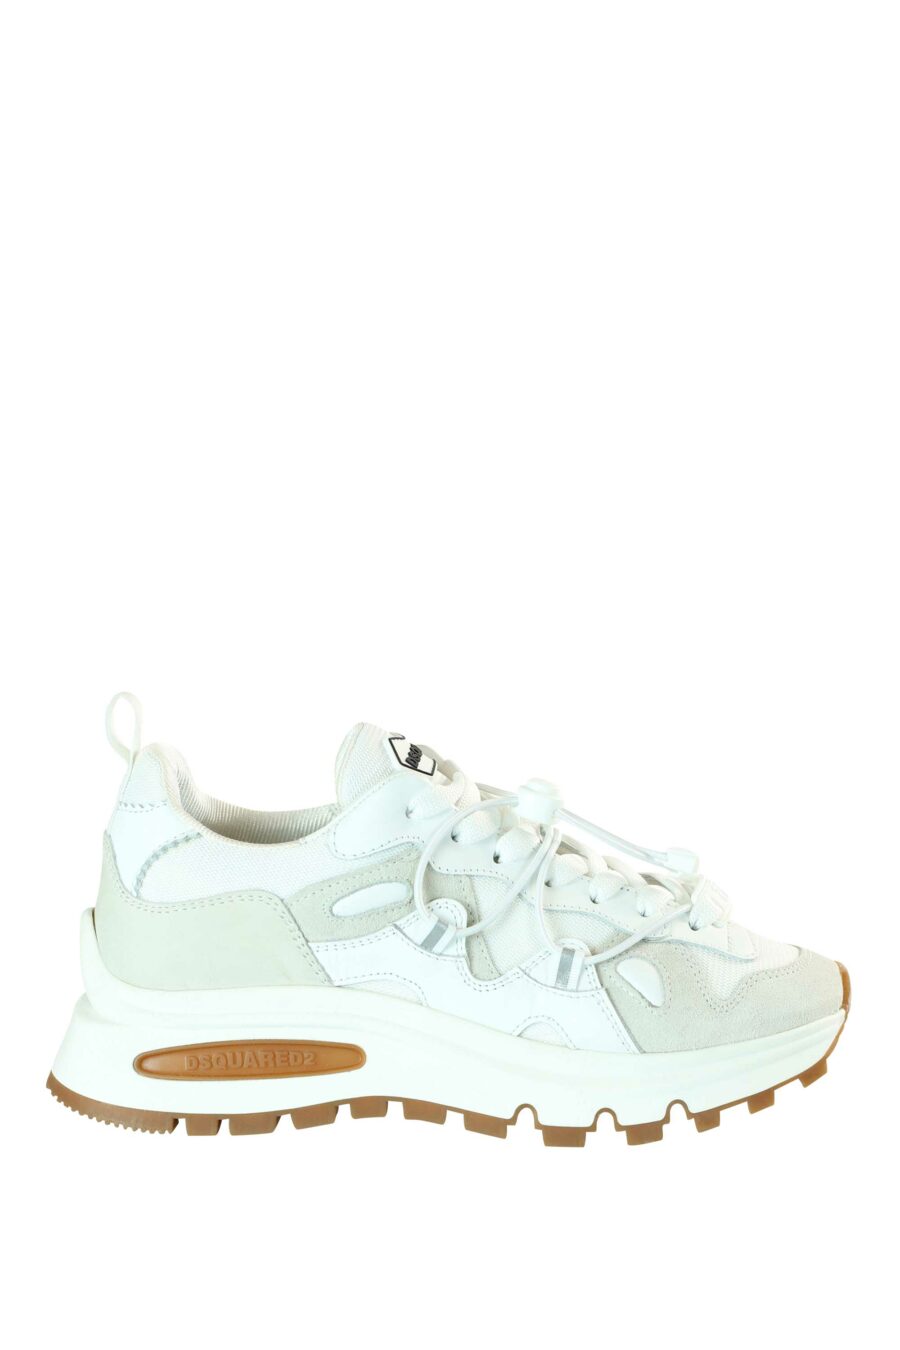 White mix trainers with white platform and brown sole - 8055777195864